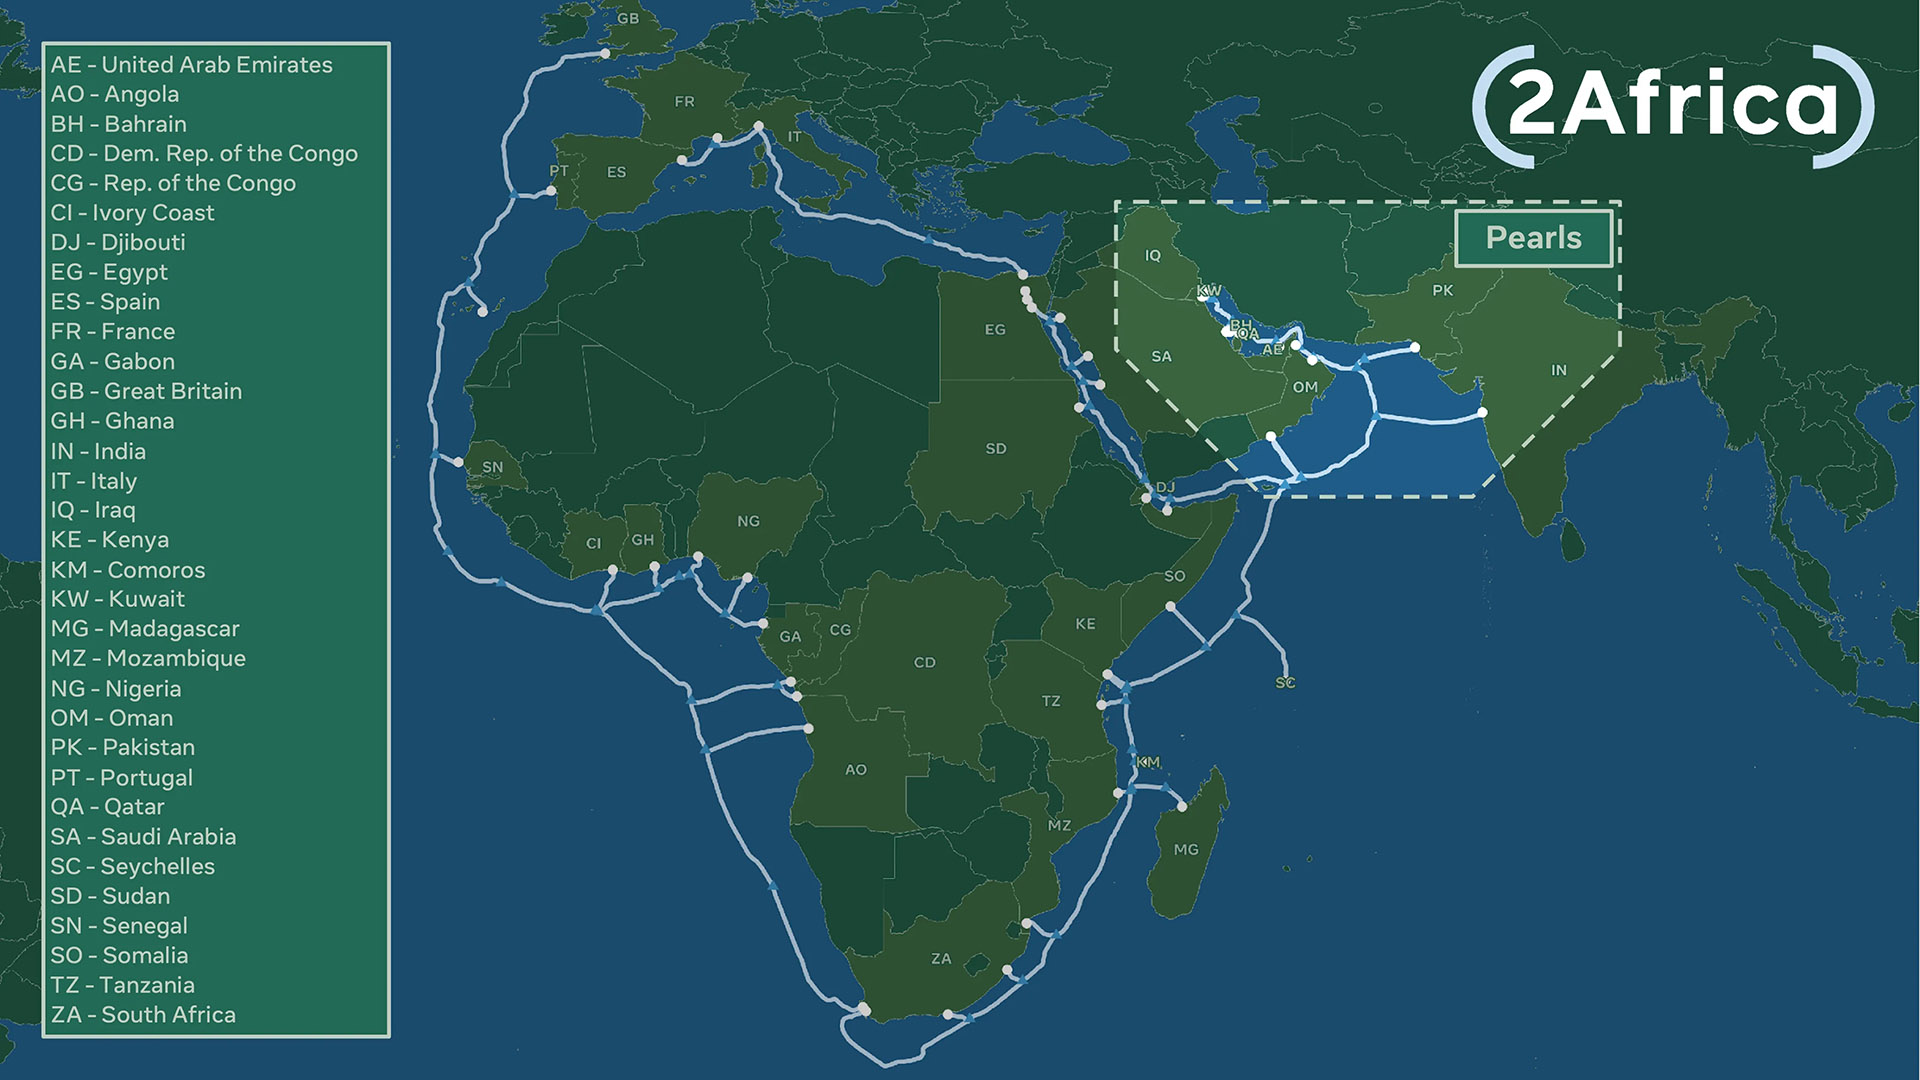 A new segment of subsea cable called 2Africa Pearls connects three continents — Africa, Europe, and Asia.